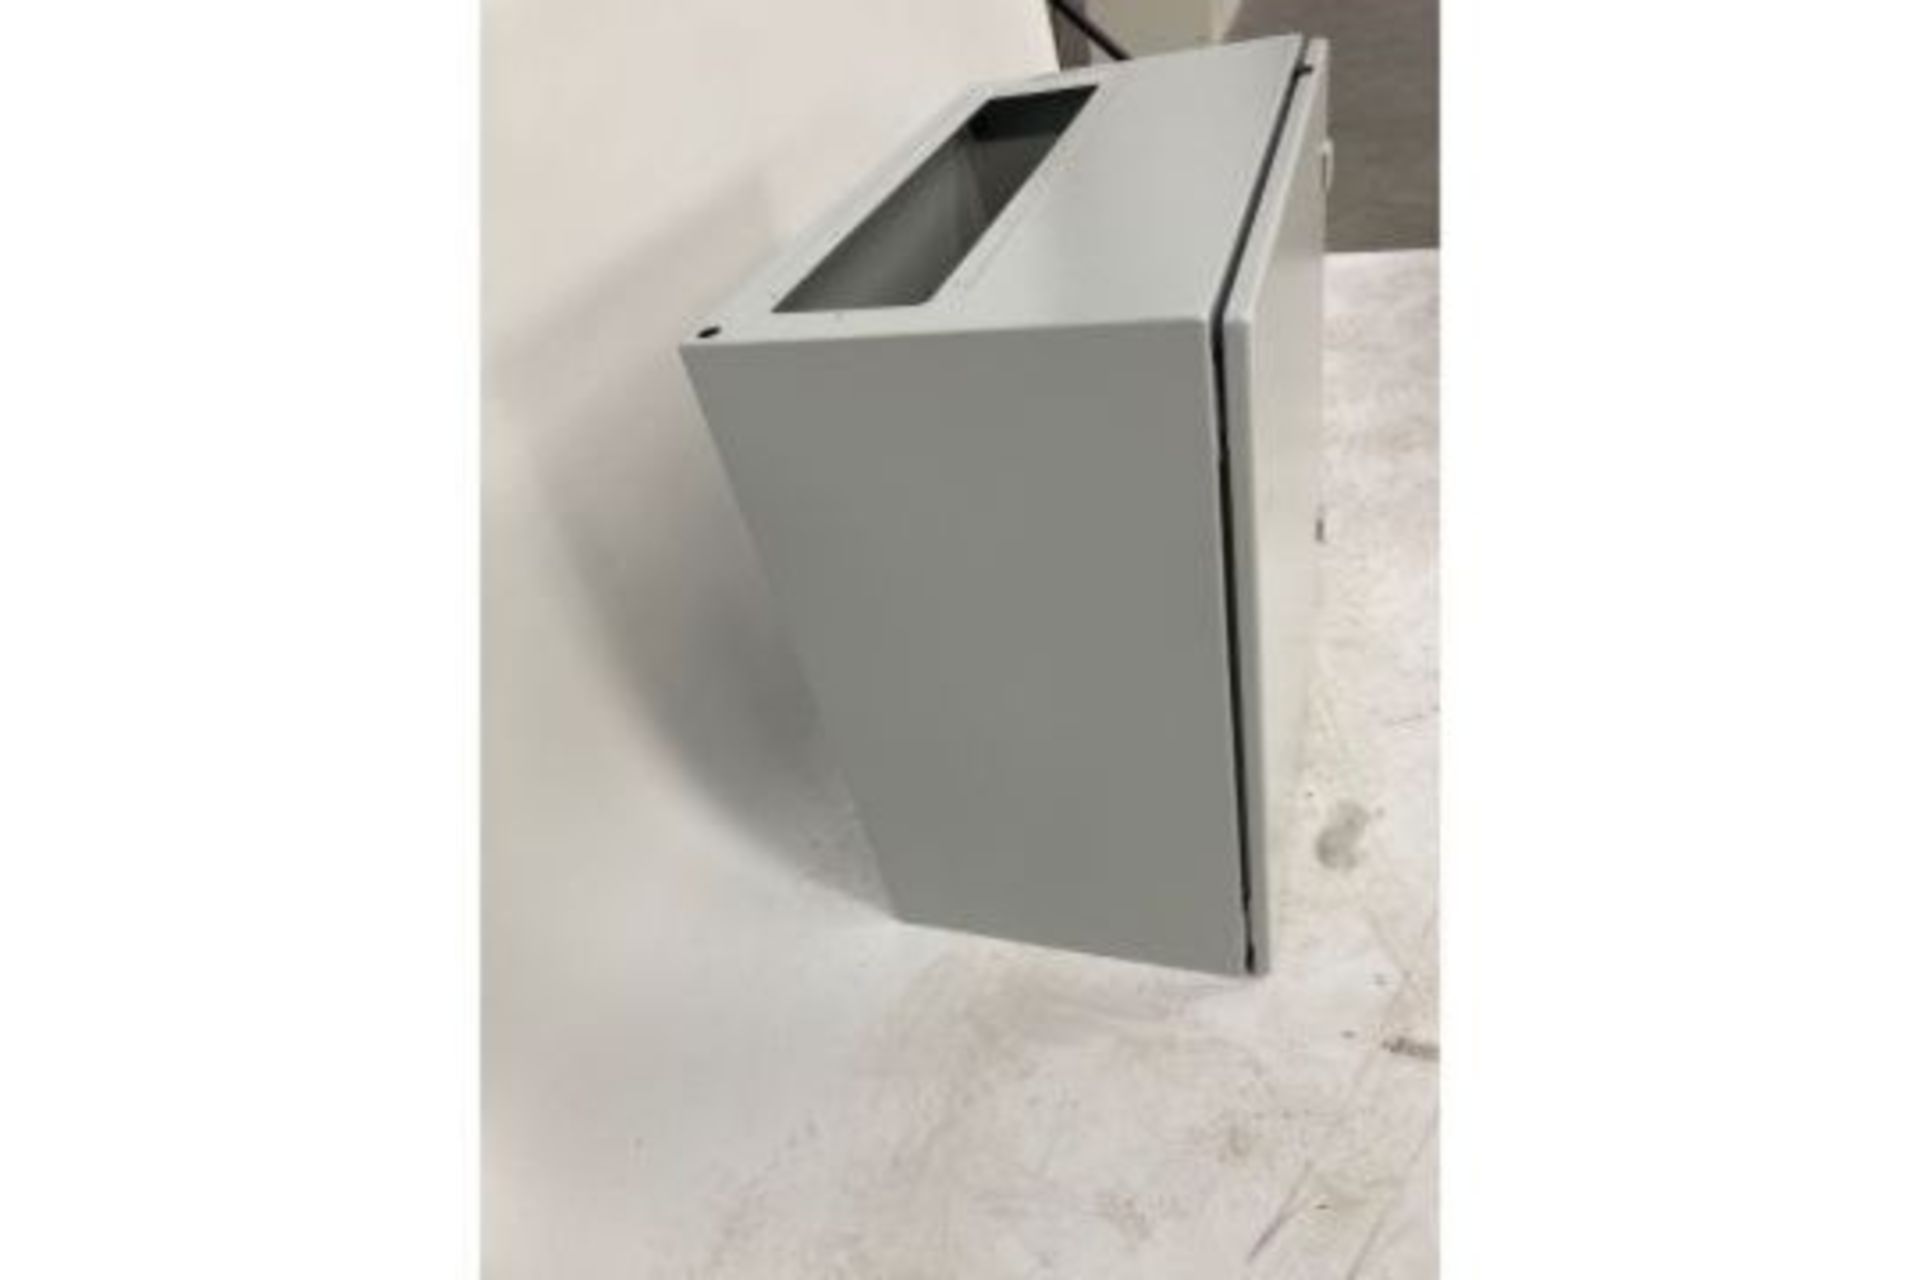 Rittal - compact cabinet. - Image 2 of 2